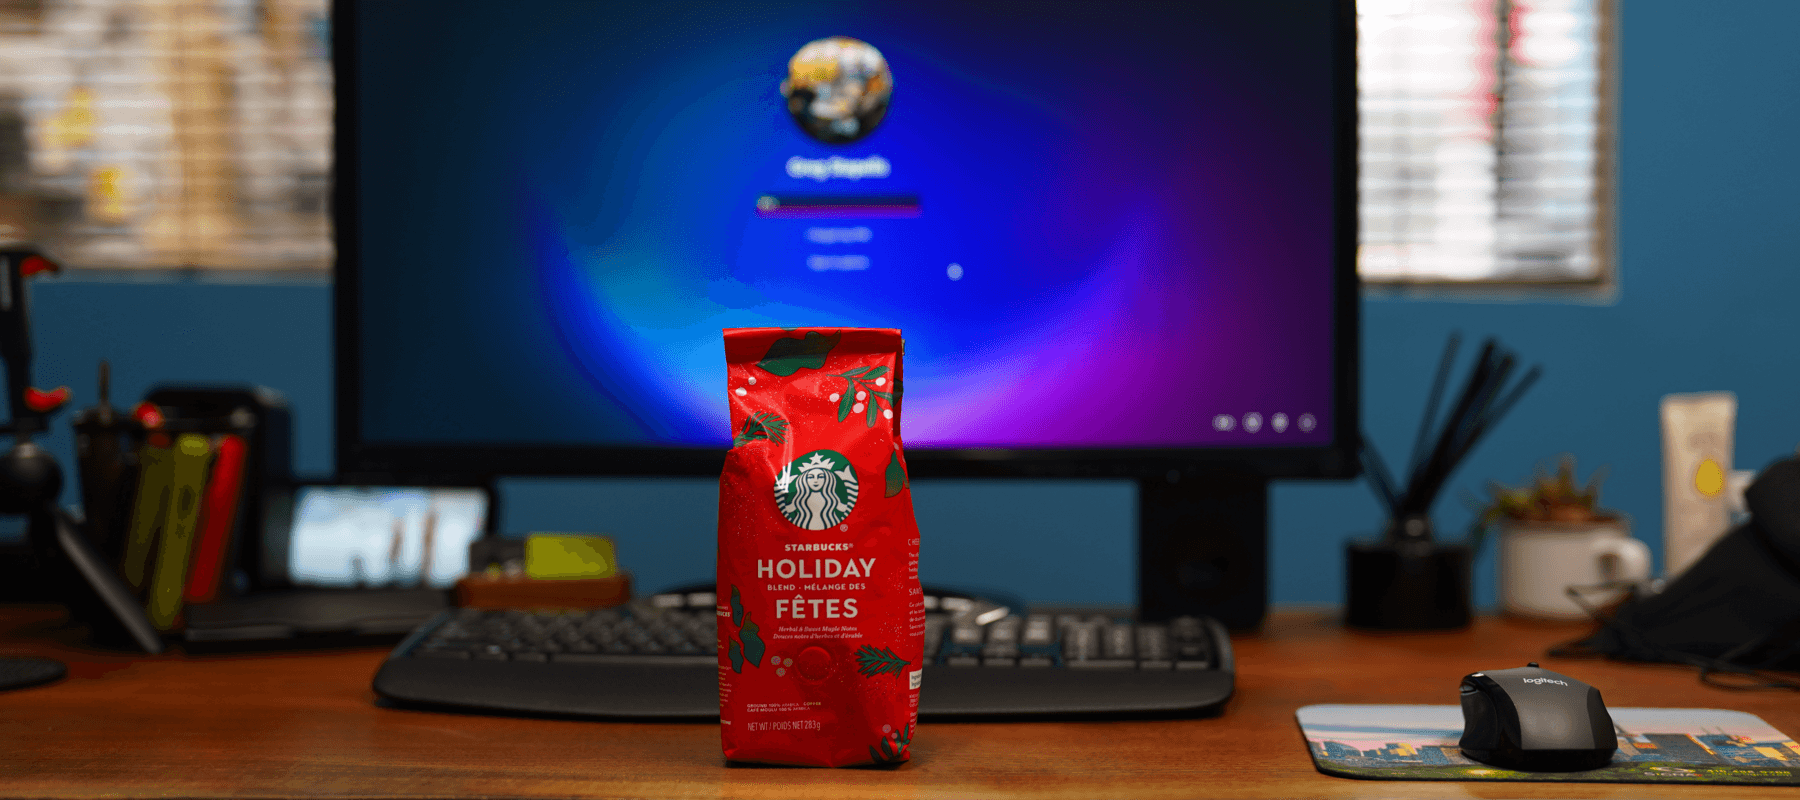 Two of my favourite things – Windows 11 and Starbucks Holiday Blend!